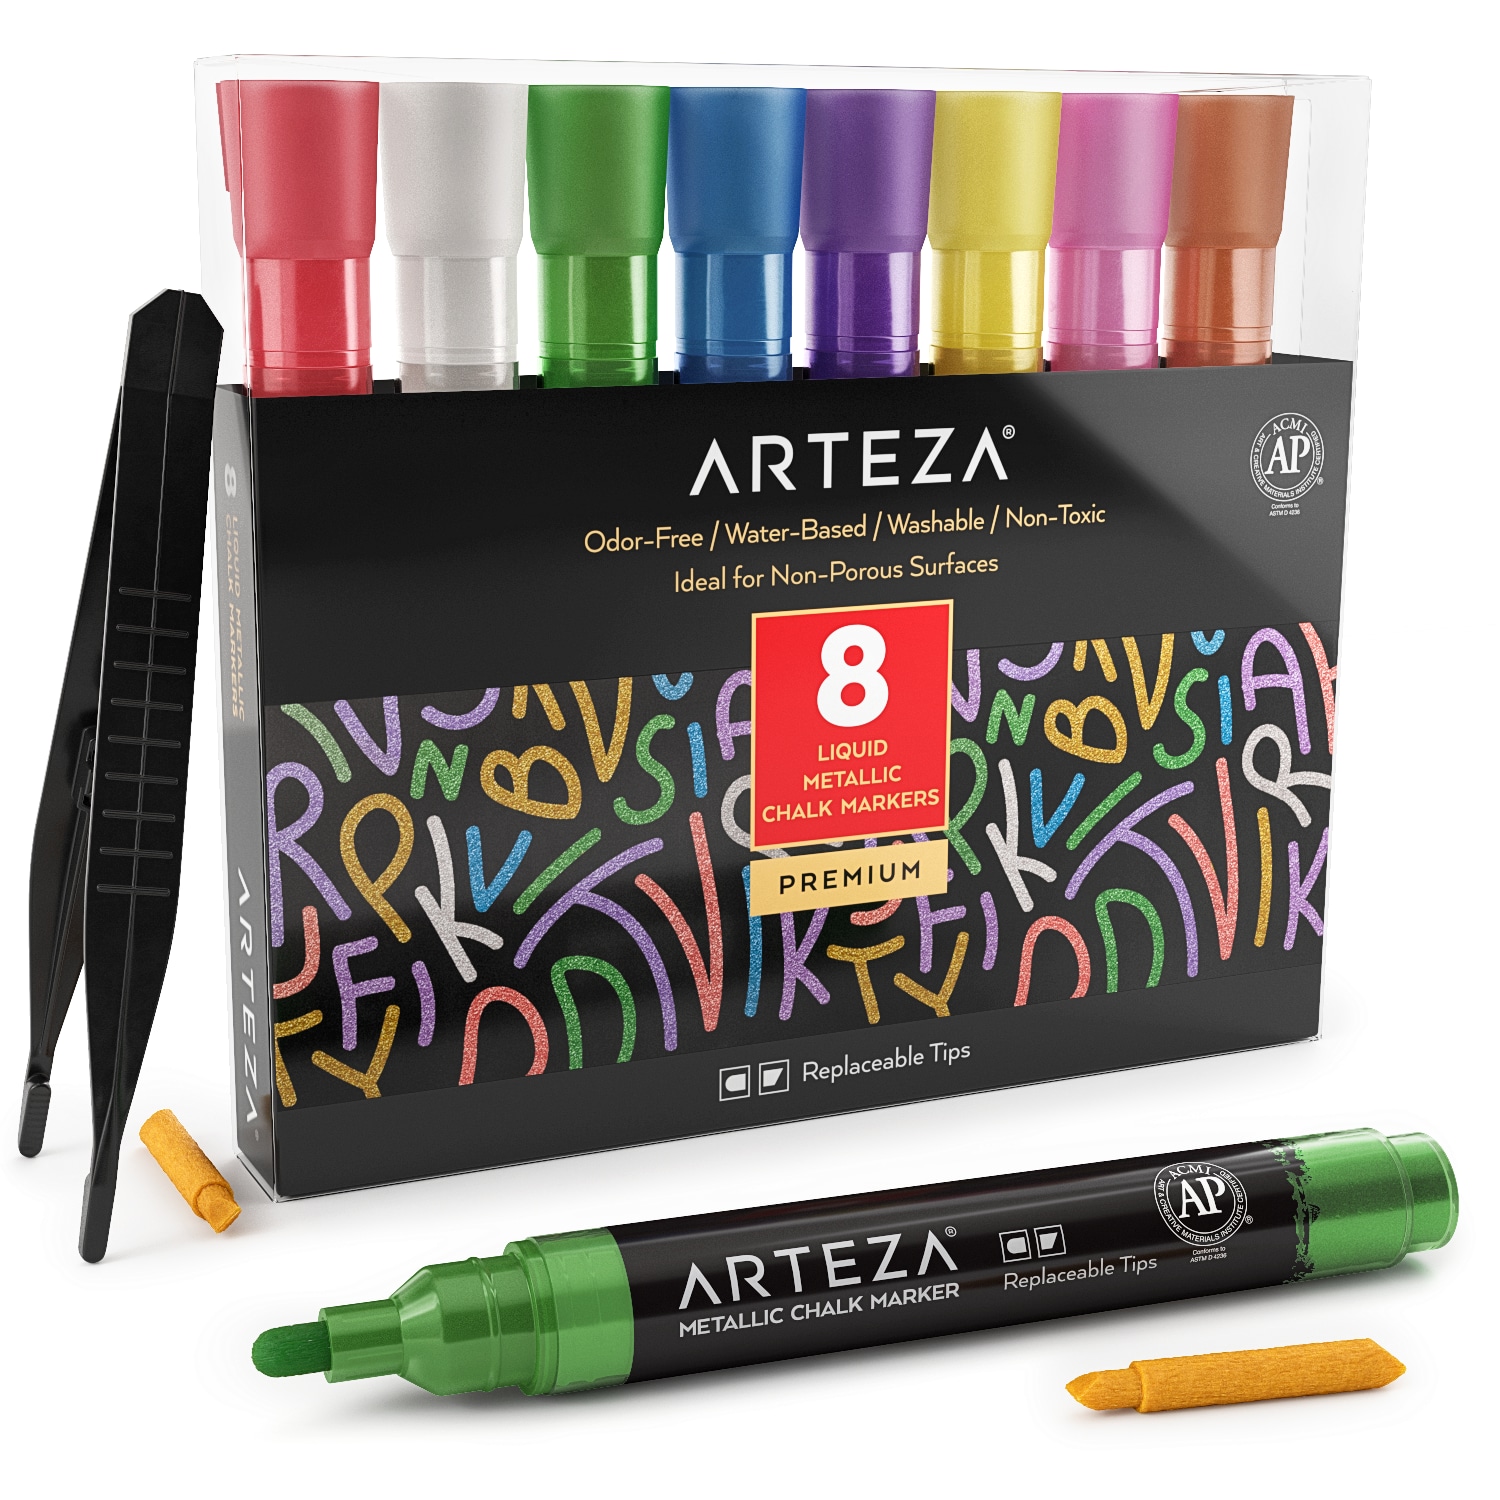 Using Brush Markers In Your Planner- Featuring Arteza Brush